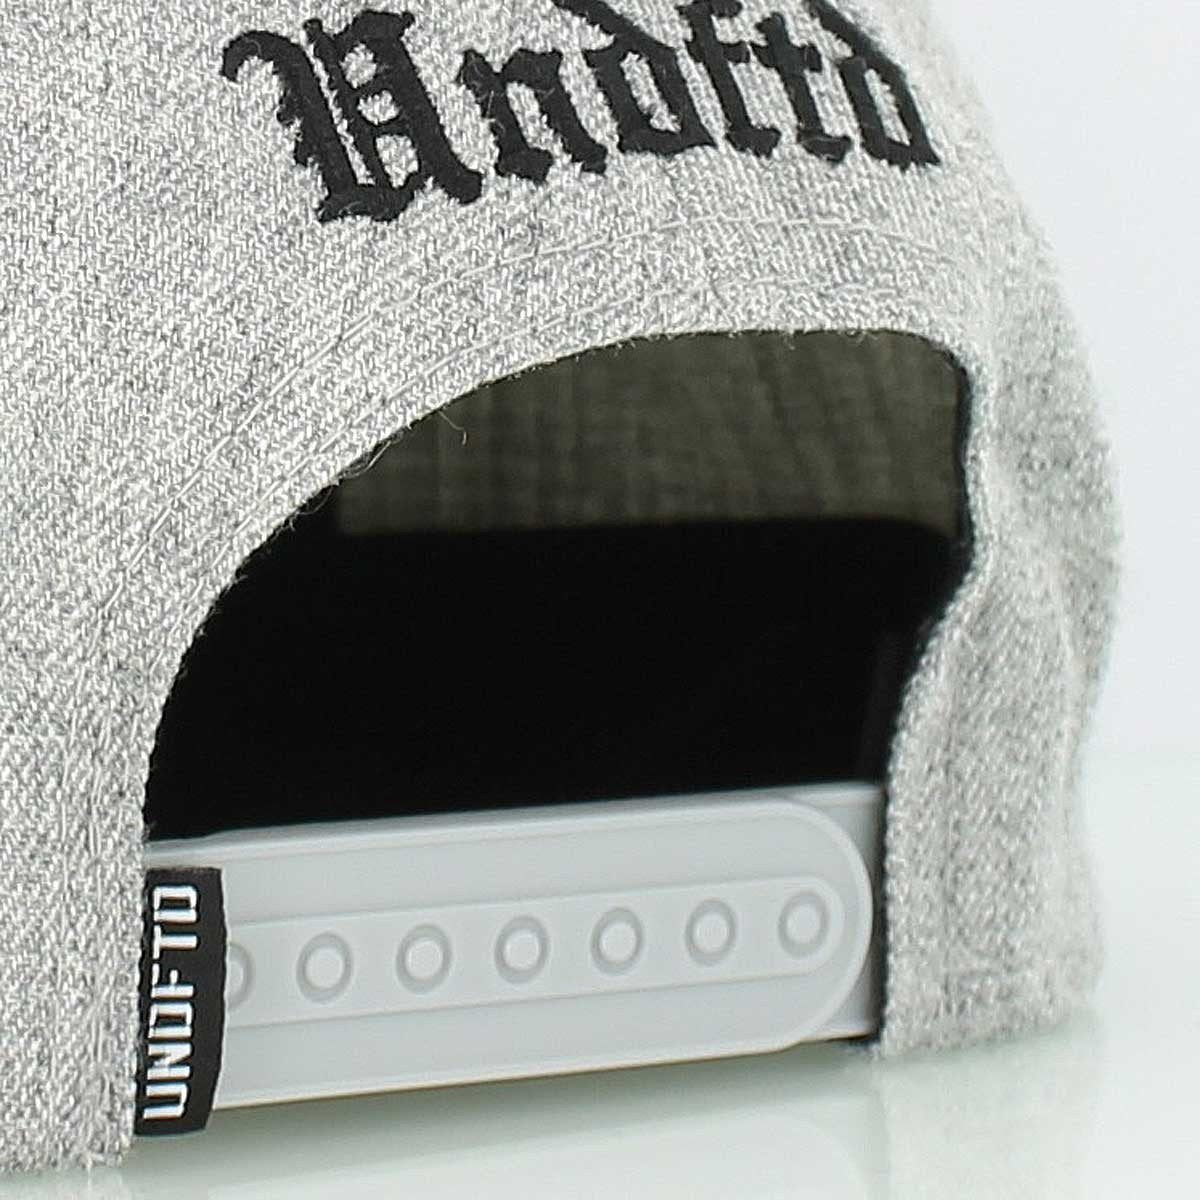 UNDEFEATED 5 STRIKE CAP // GREY HEATHER-The Collateral